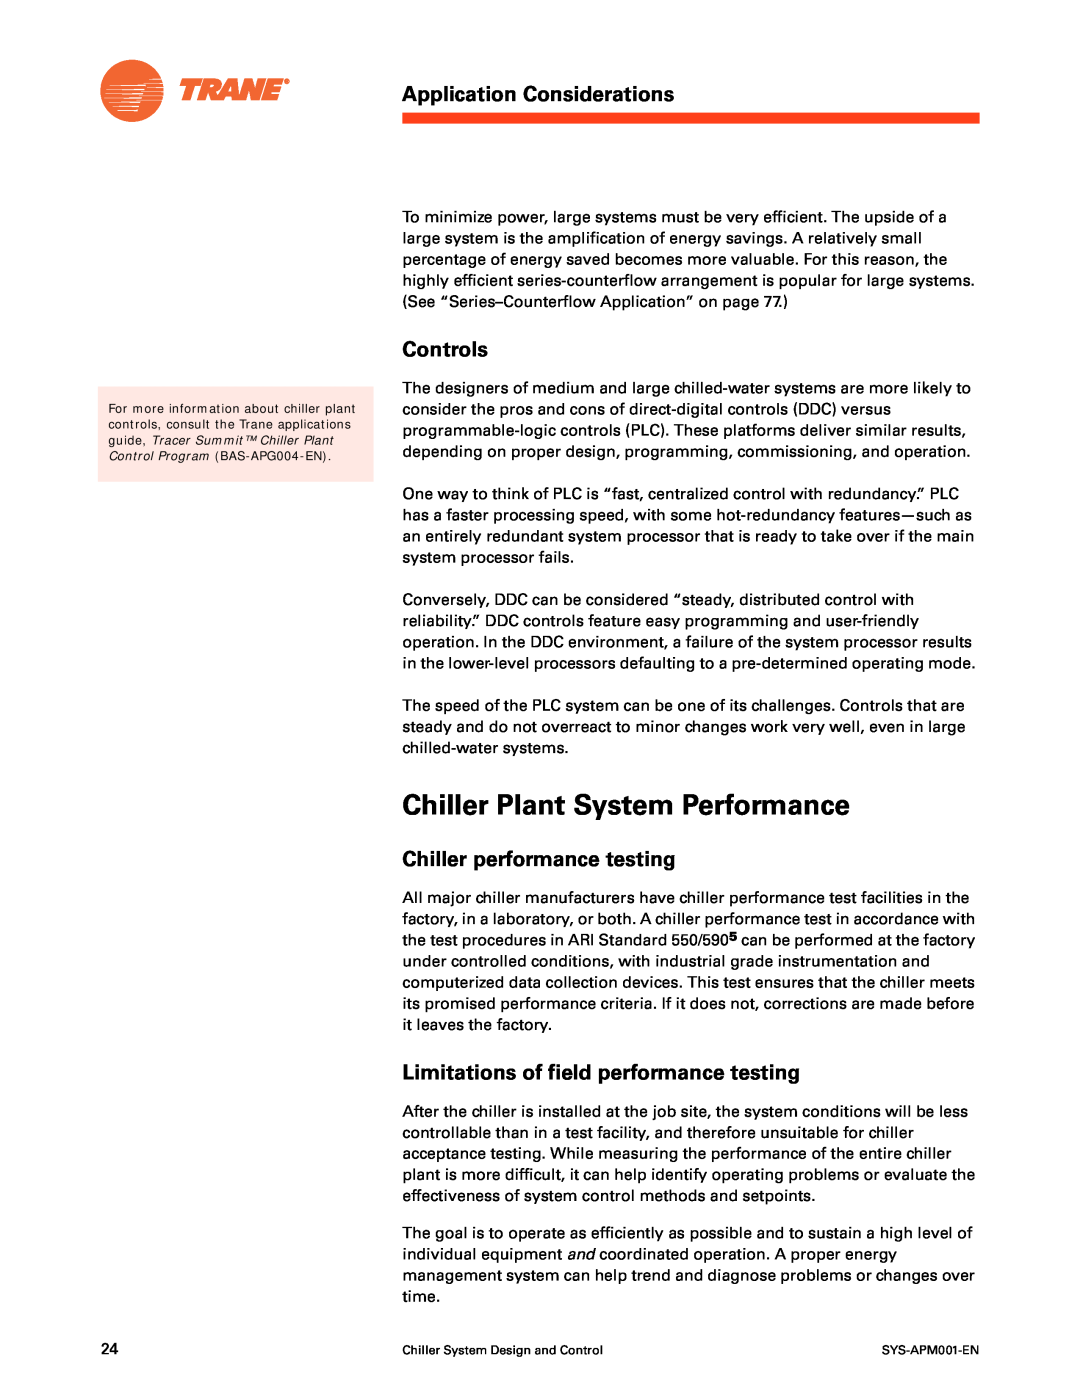 Trane SYS-APM001-EN Chiller Plant System Performance, Controls, Chiller performance testing, Application Considerations 